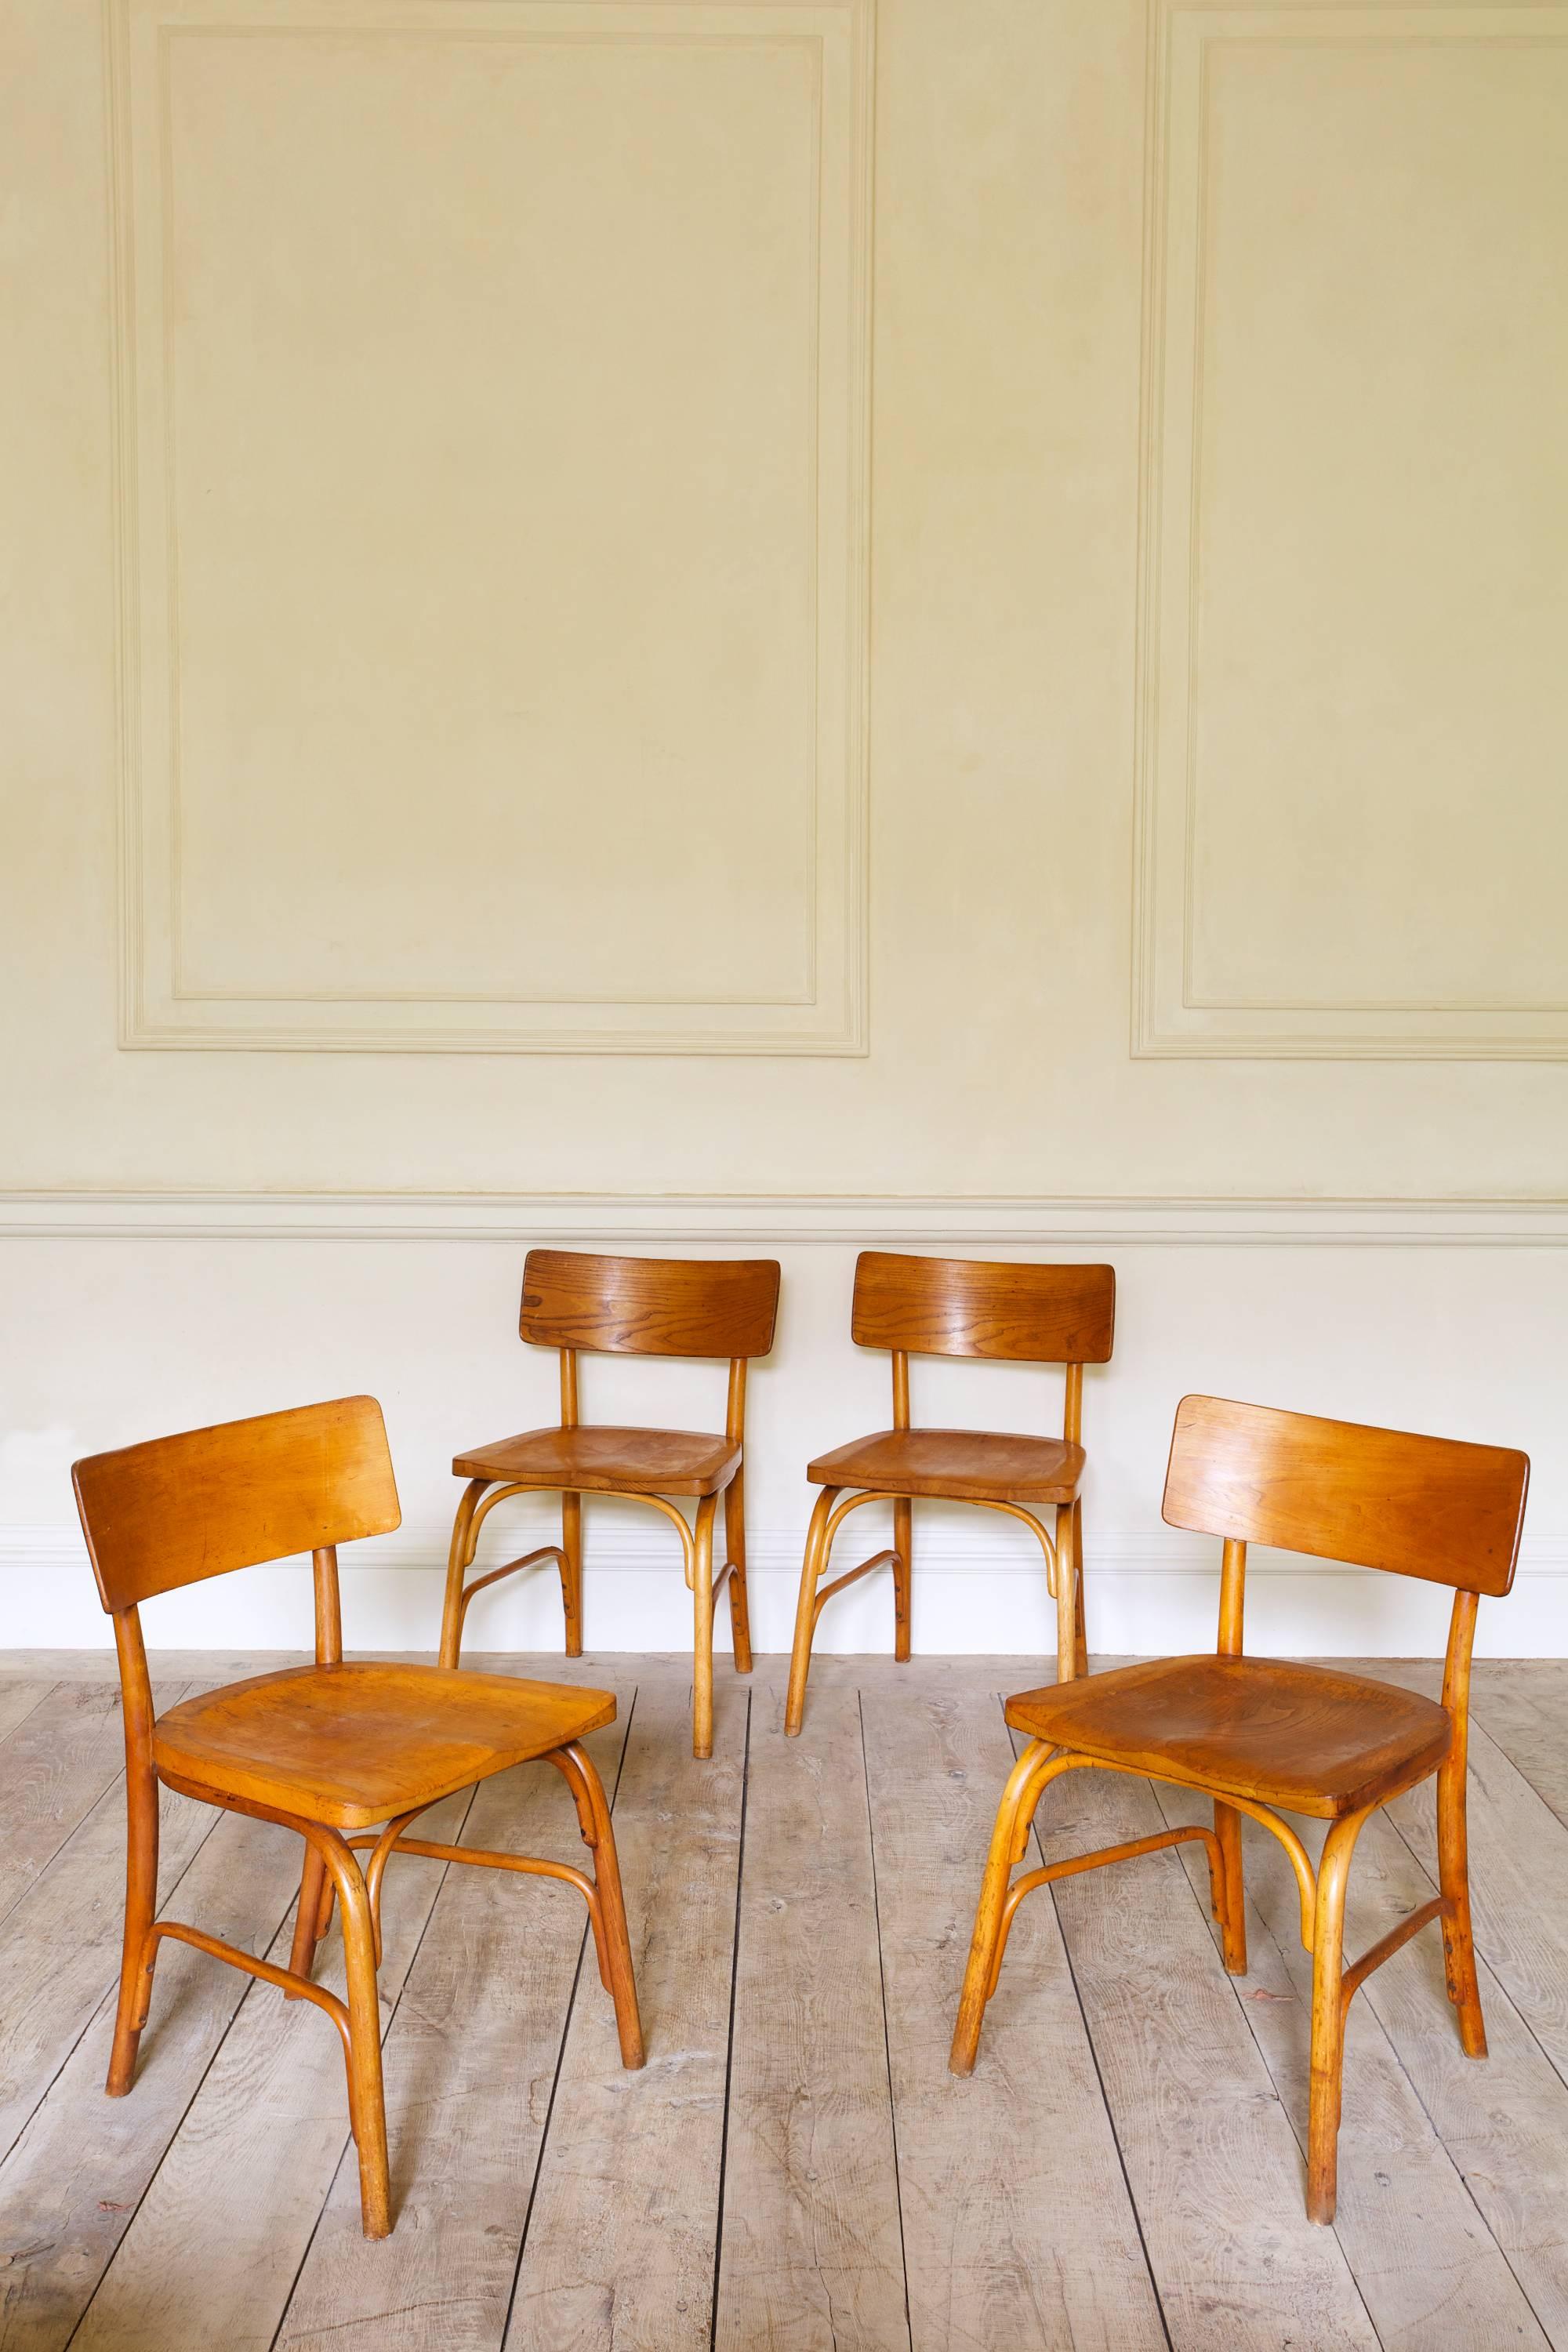 Beech bentwood with shaped solid elm seat and back, all with a fine aged patina. Designed in 1930 by Frits Schlegel and subsequently manufactured by Fritz Hansen.